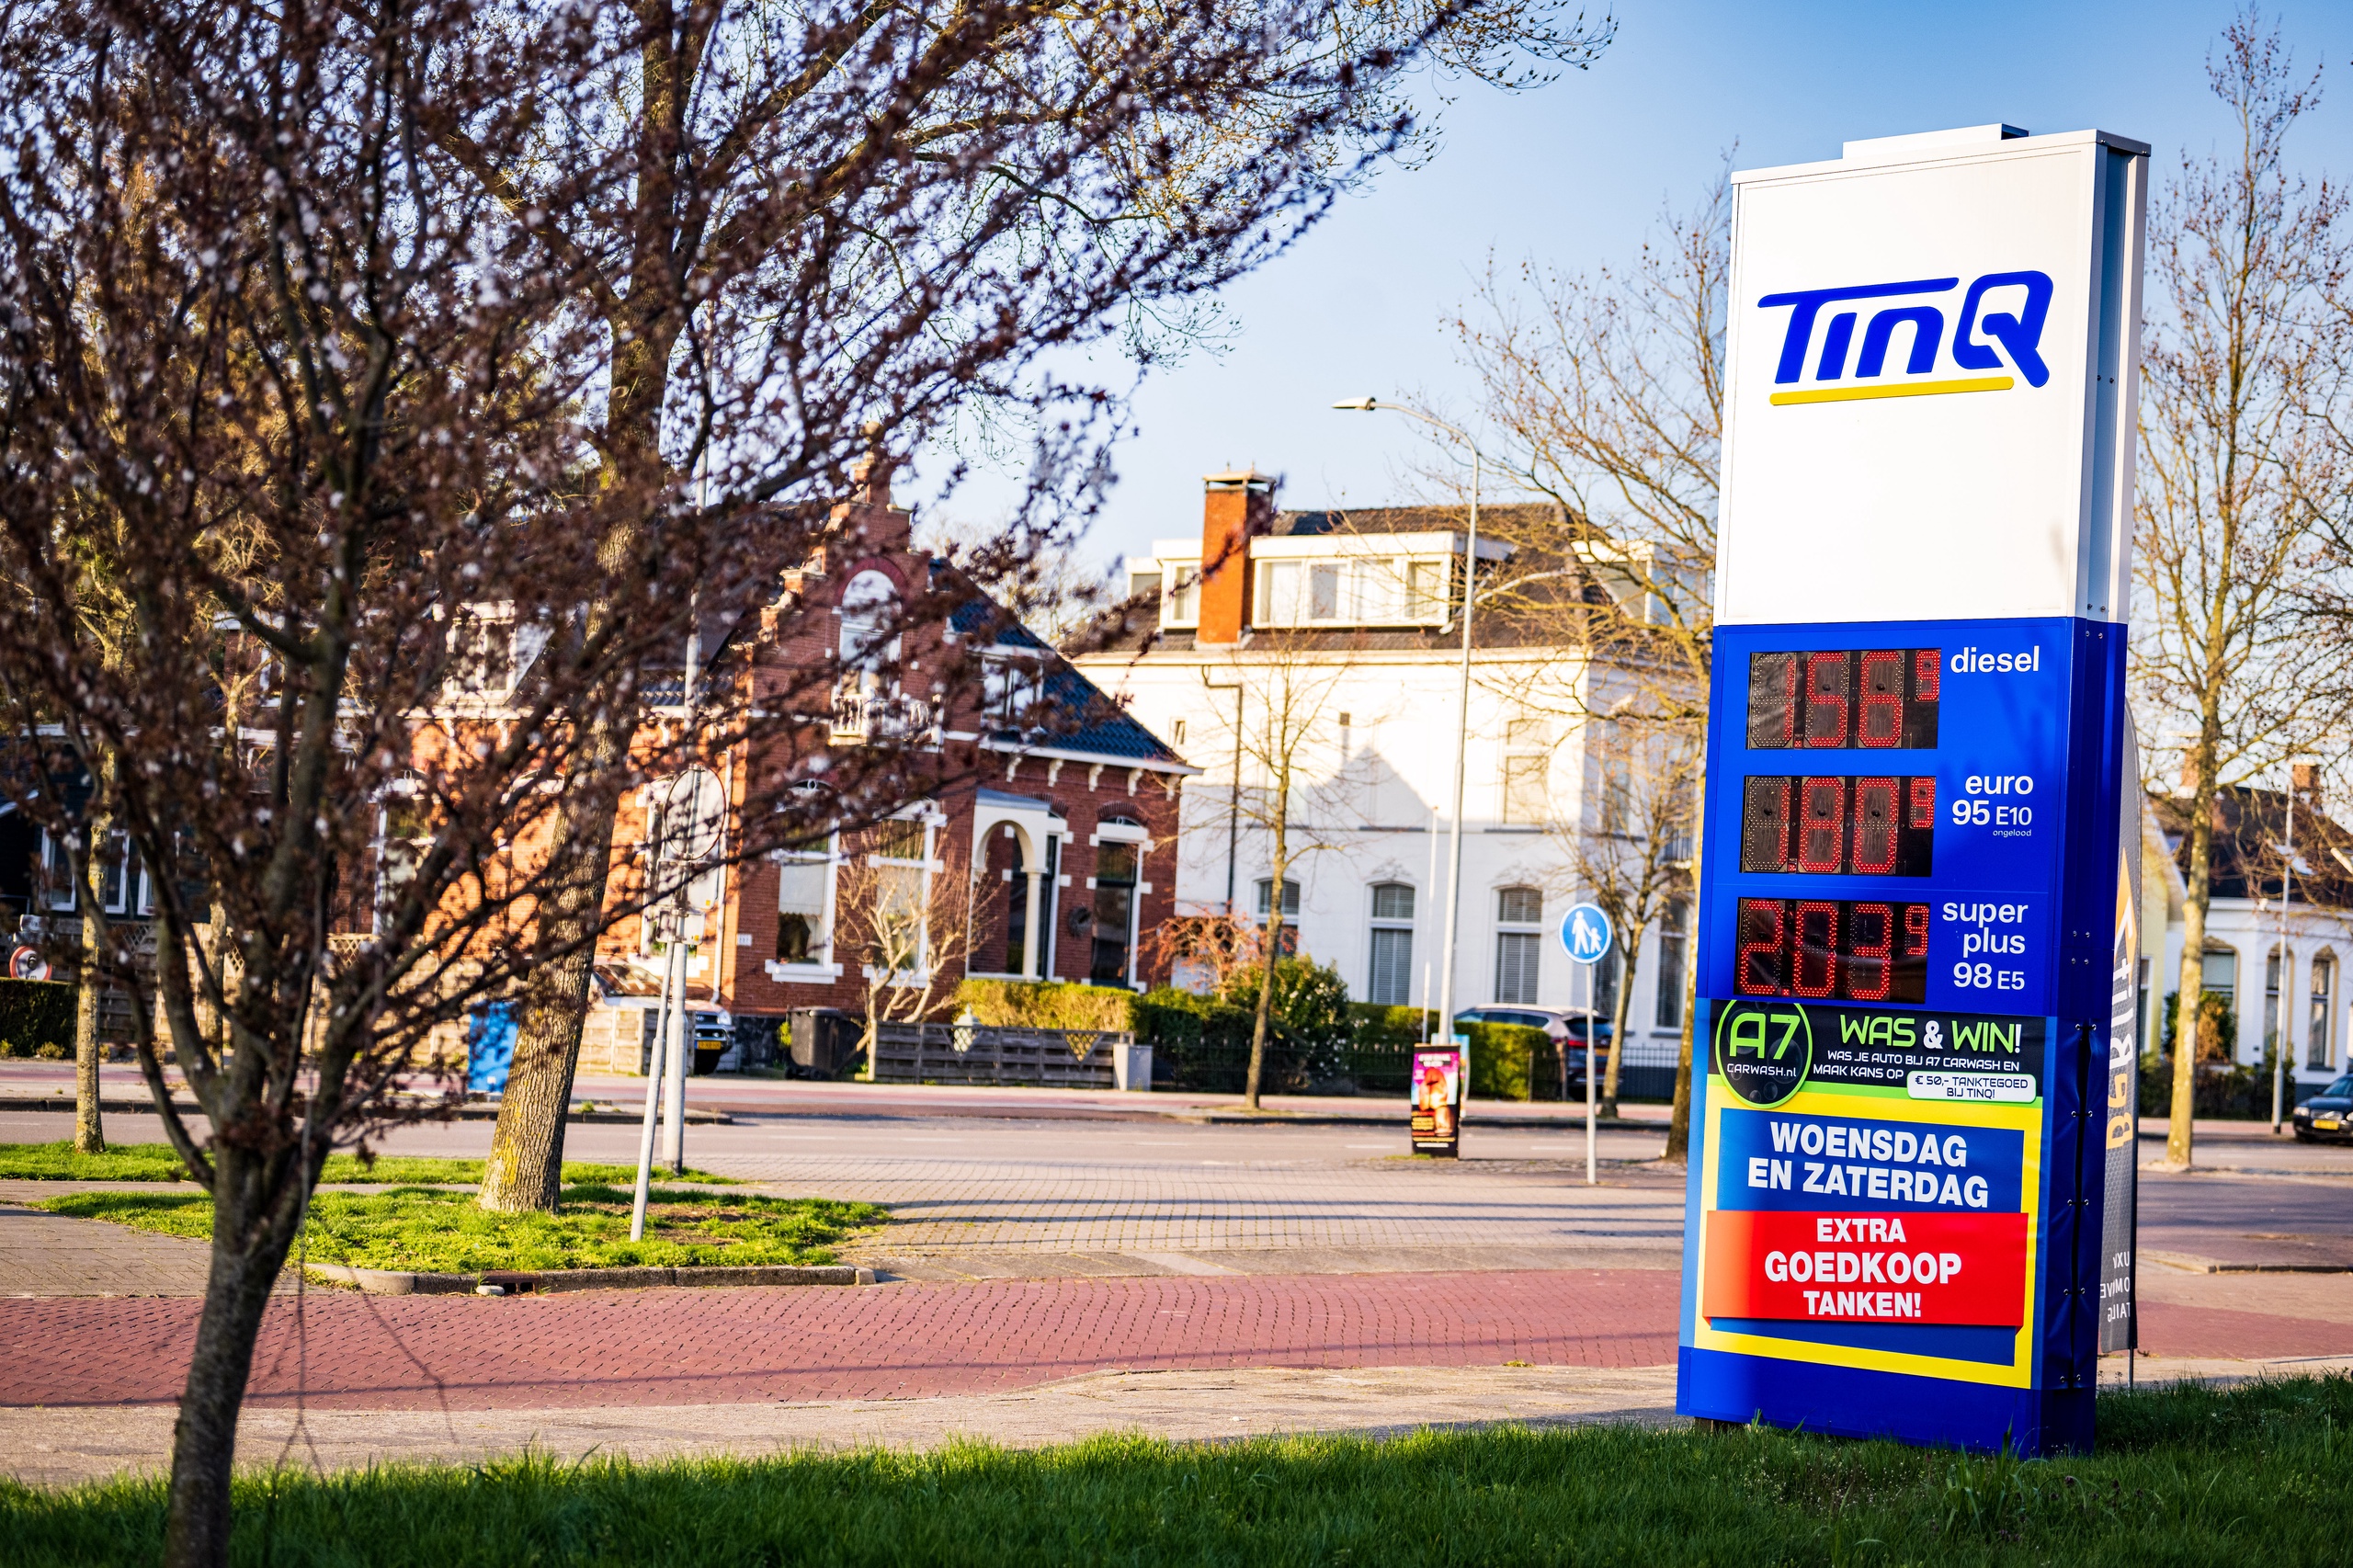 It is not expected that the alliance of major oil-producing countries such as Saudi Arabia and Russia will again fiddle with the policy, which also affects prices at the pump in the Netherlands.